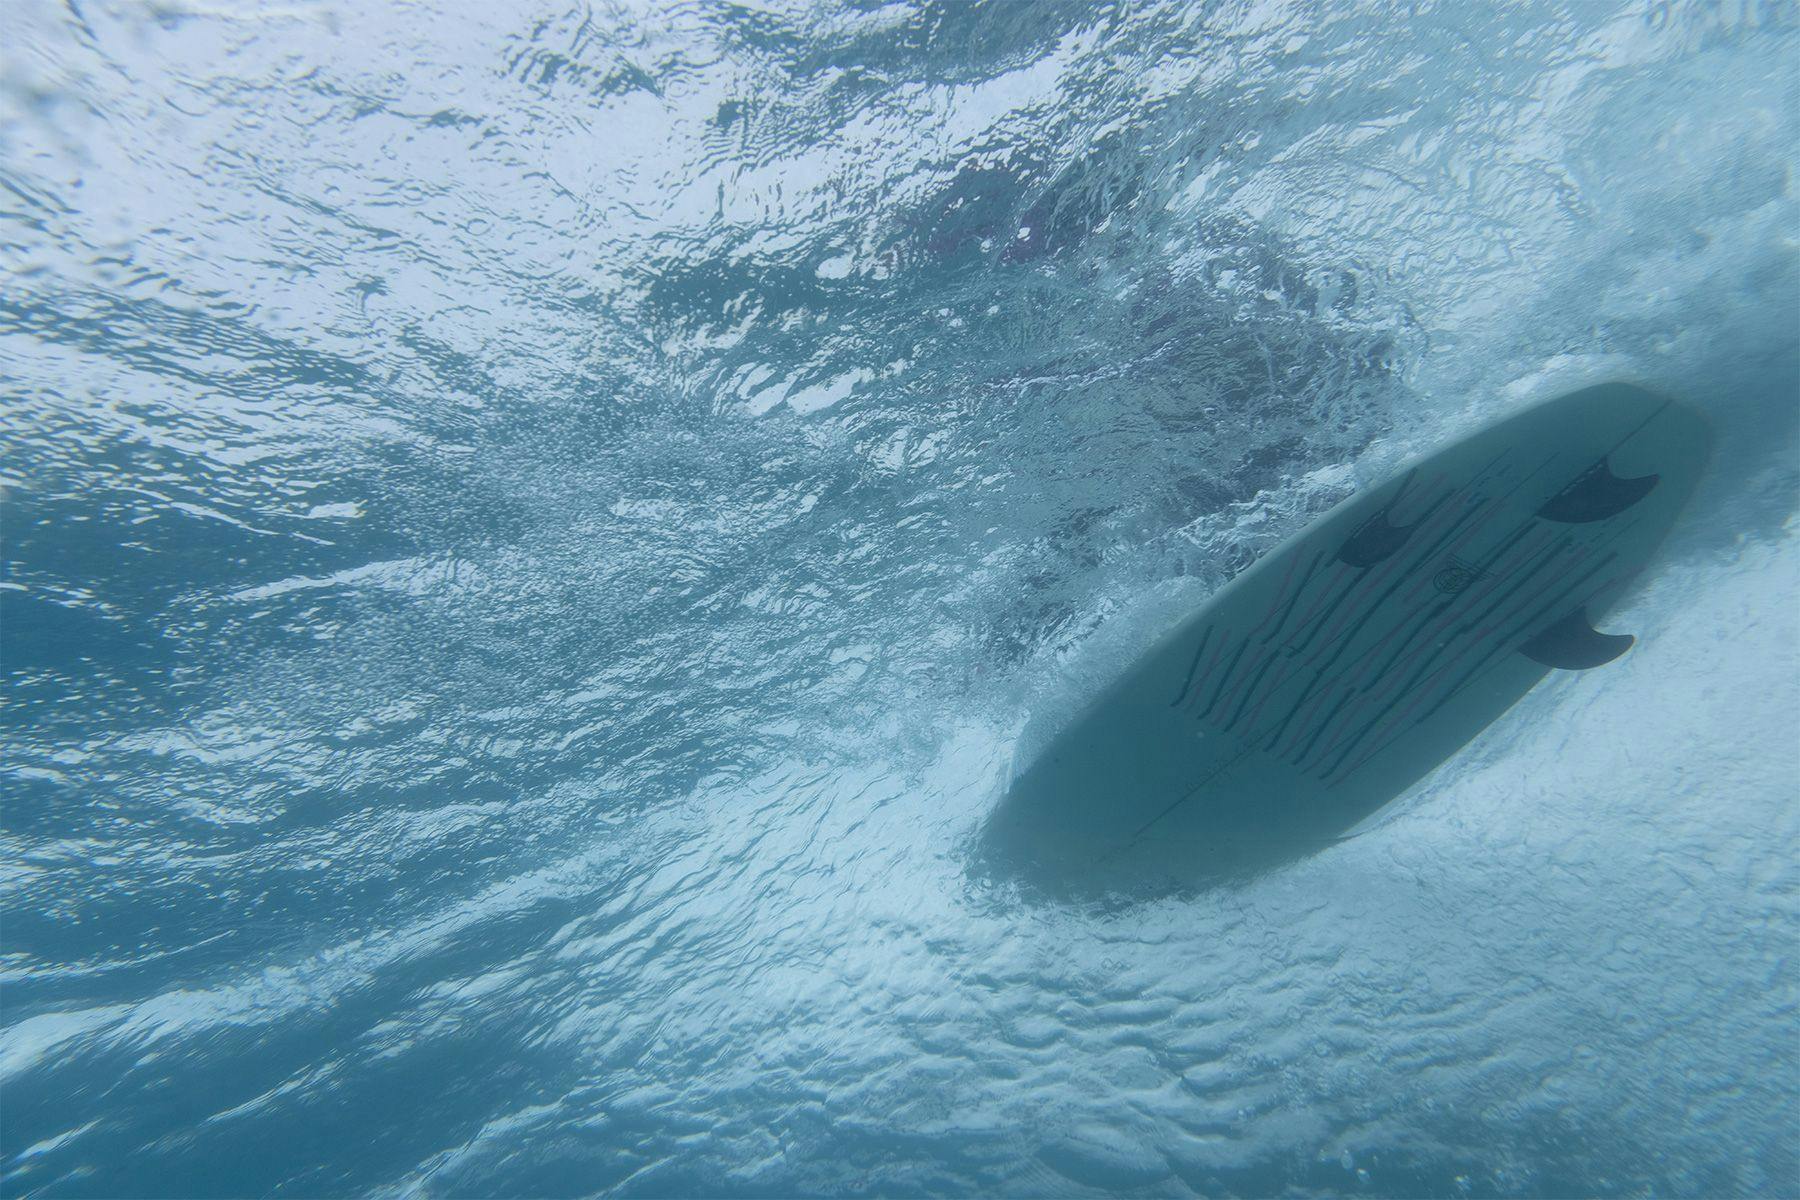 underwater view of a surfboard going along a wave with telltale ribbons showing the flow of water